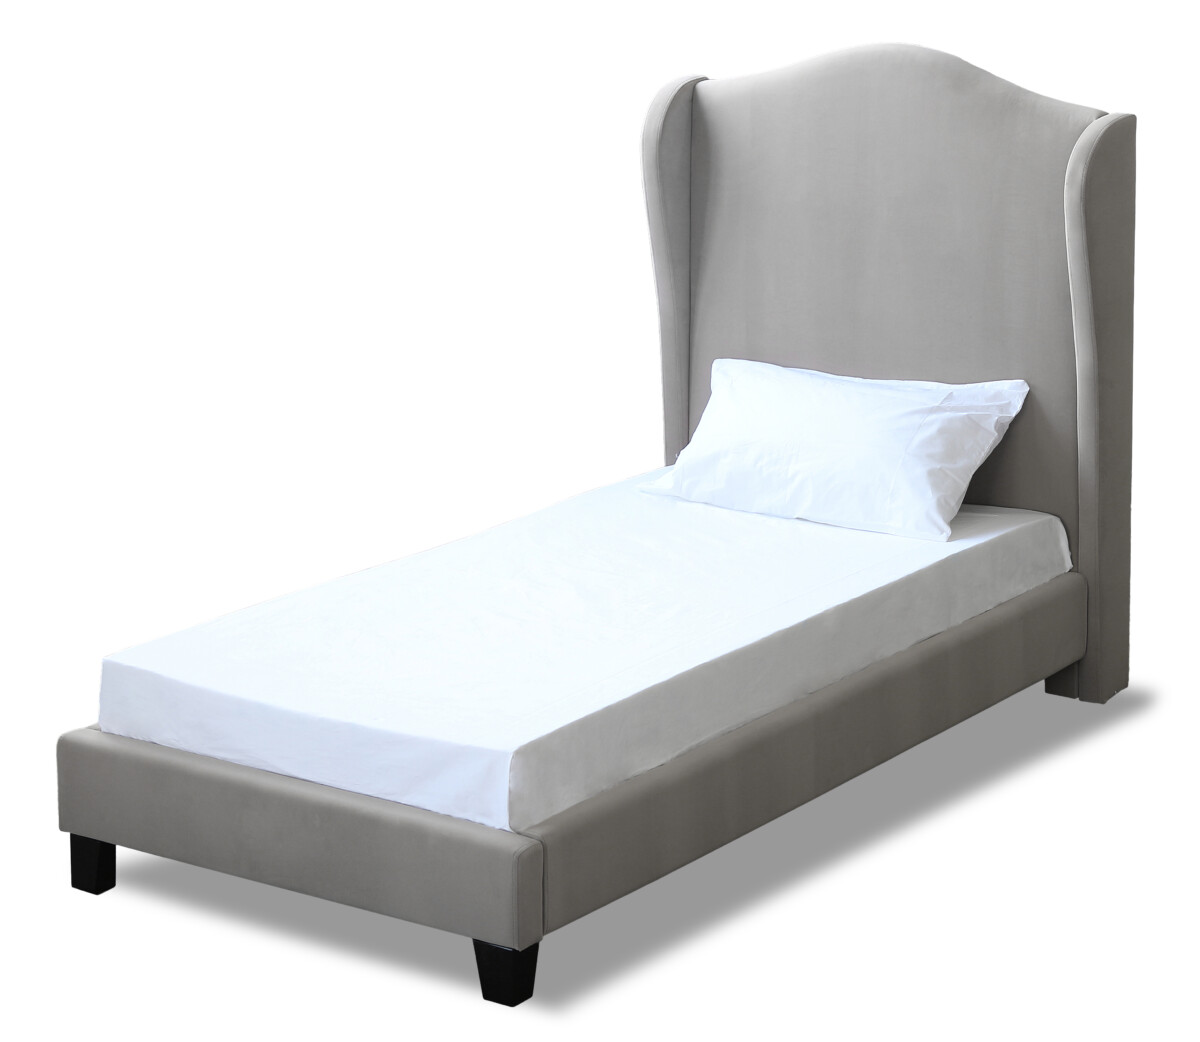 Chateaux single bed in silver velvet